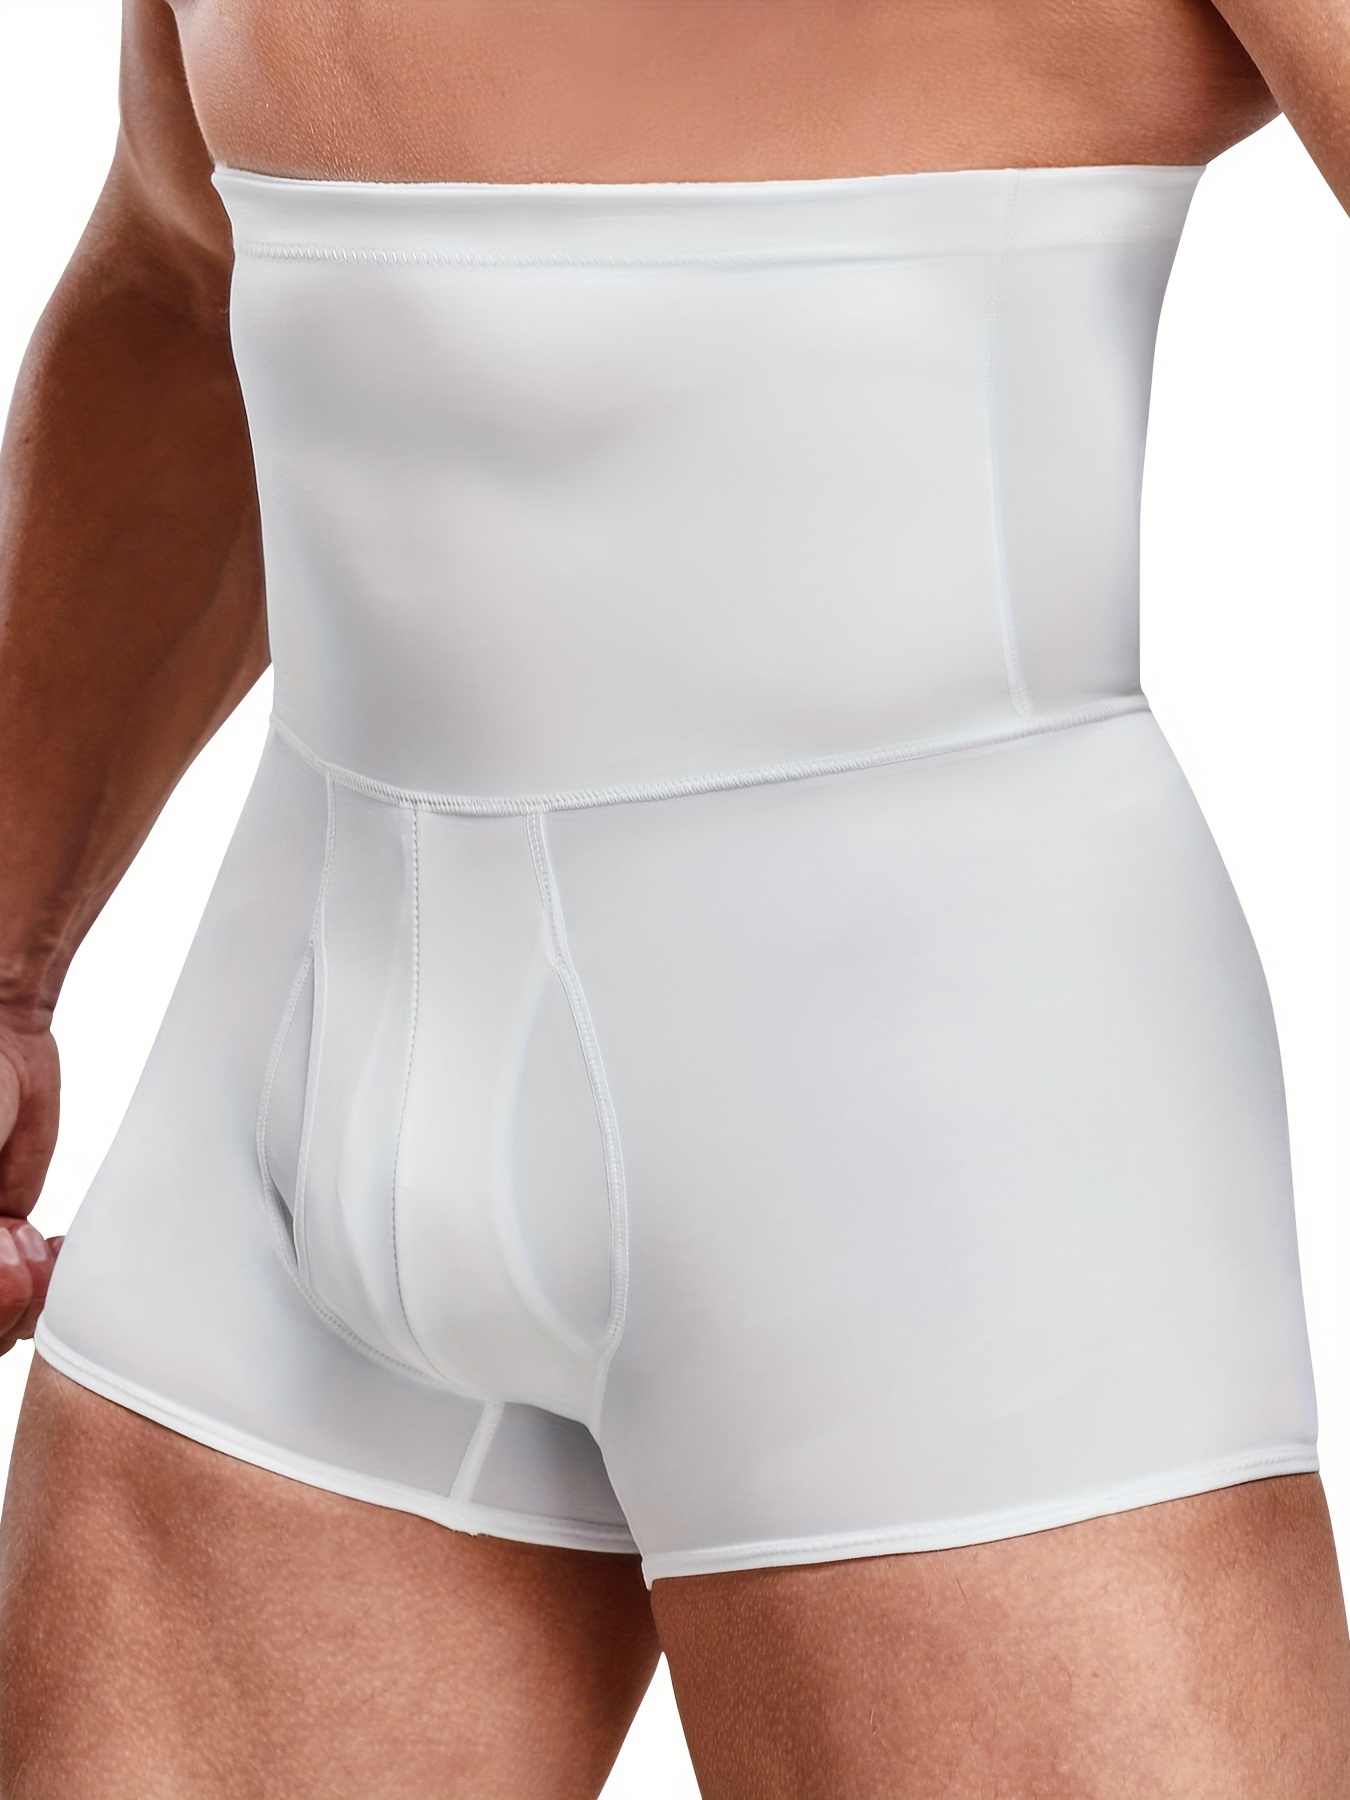 High Waist Tummy Control Shorts For Men Seamless Mens Compression Body  Shaper With Abdomen Control And Slimming Features From Fandeng, $30.44